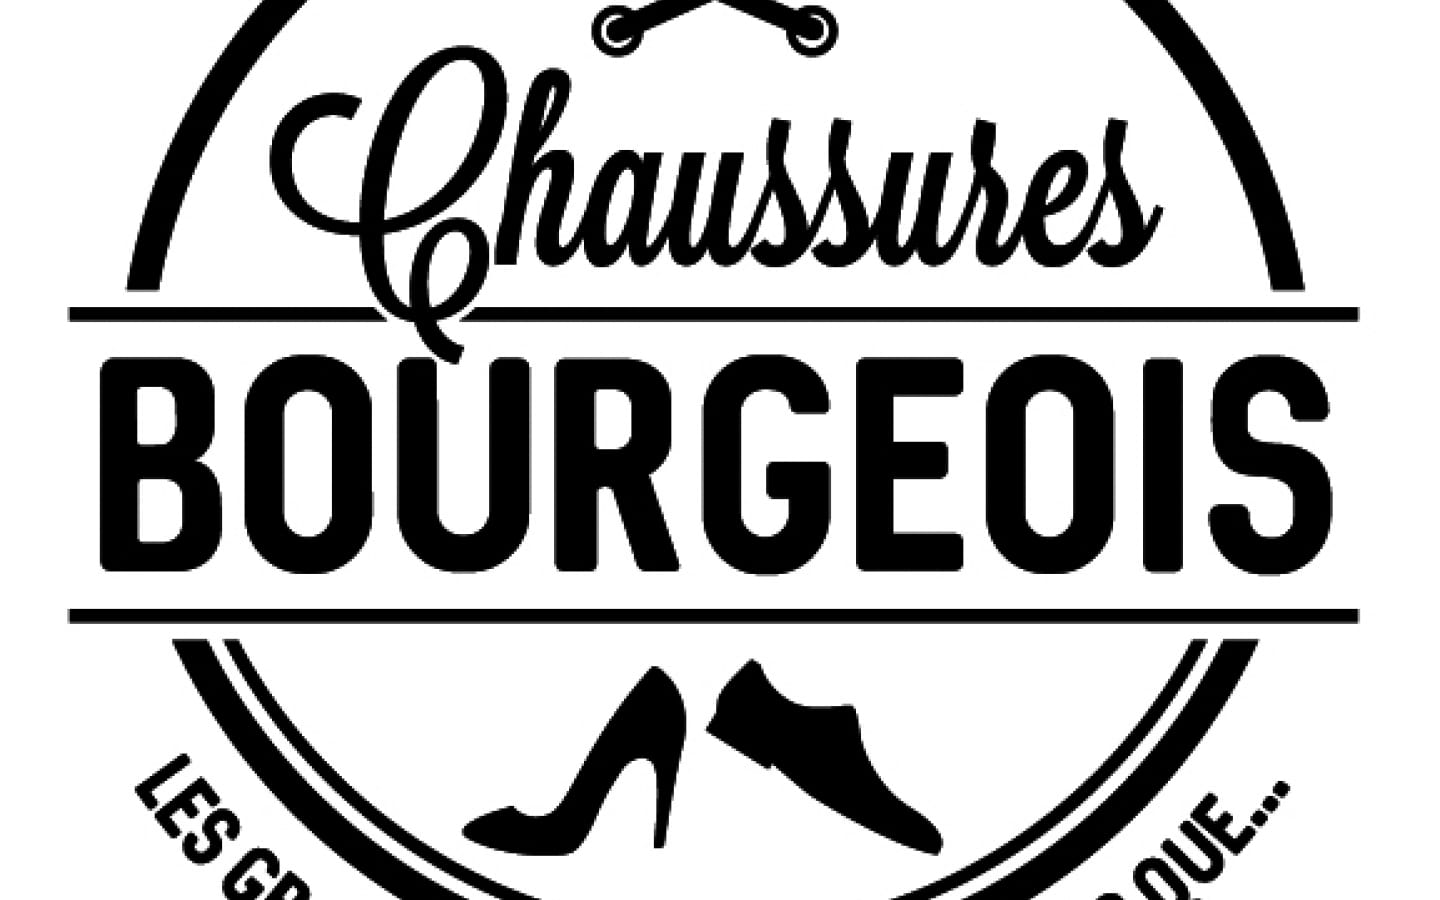 Chaussures Bourgeois